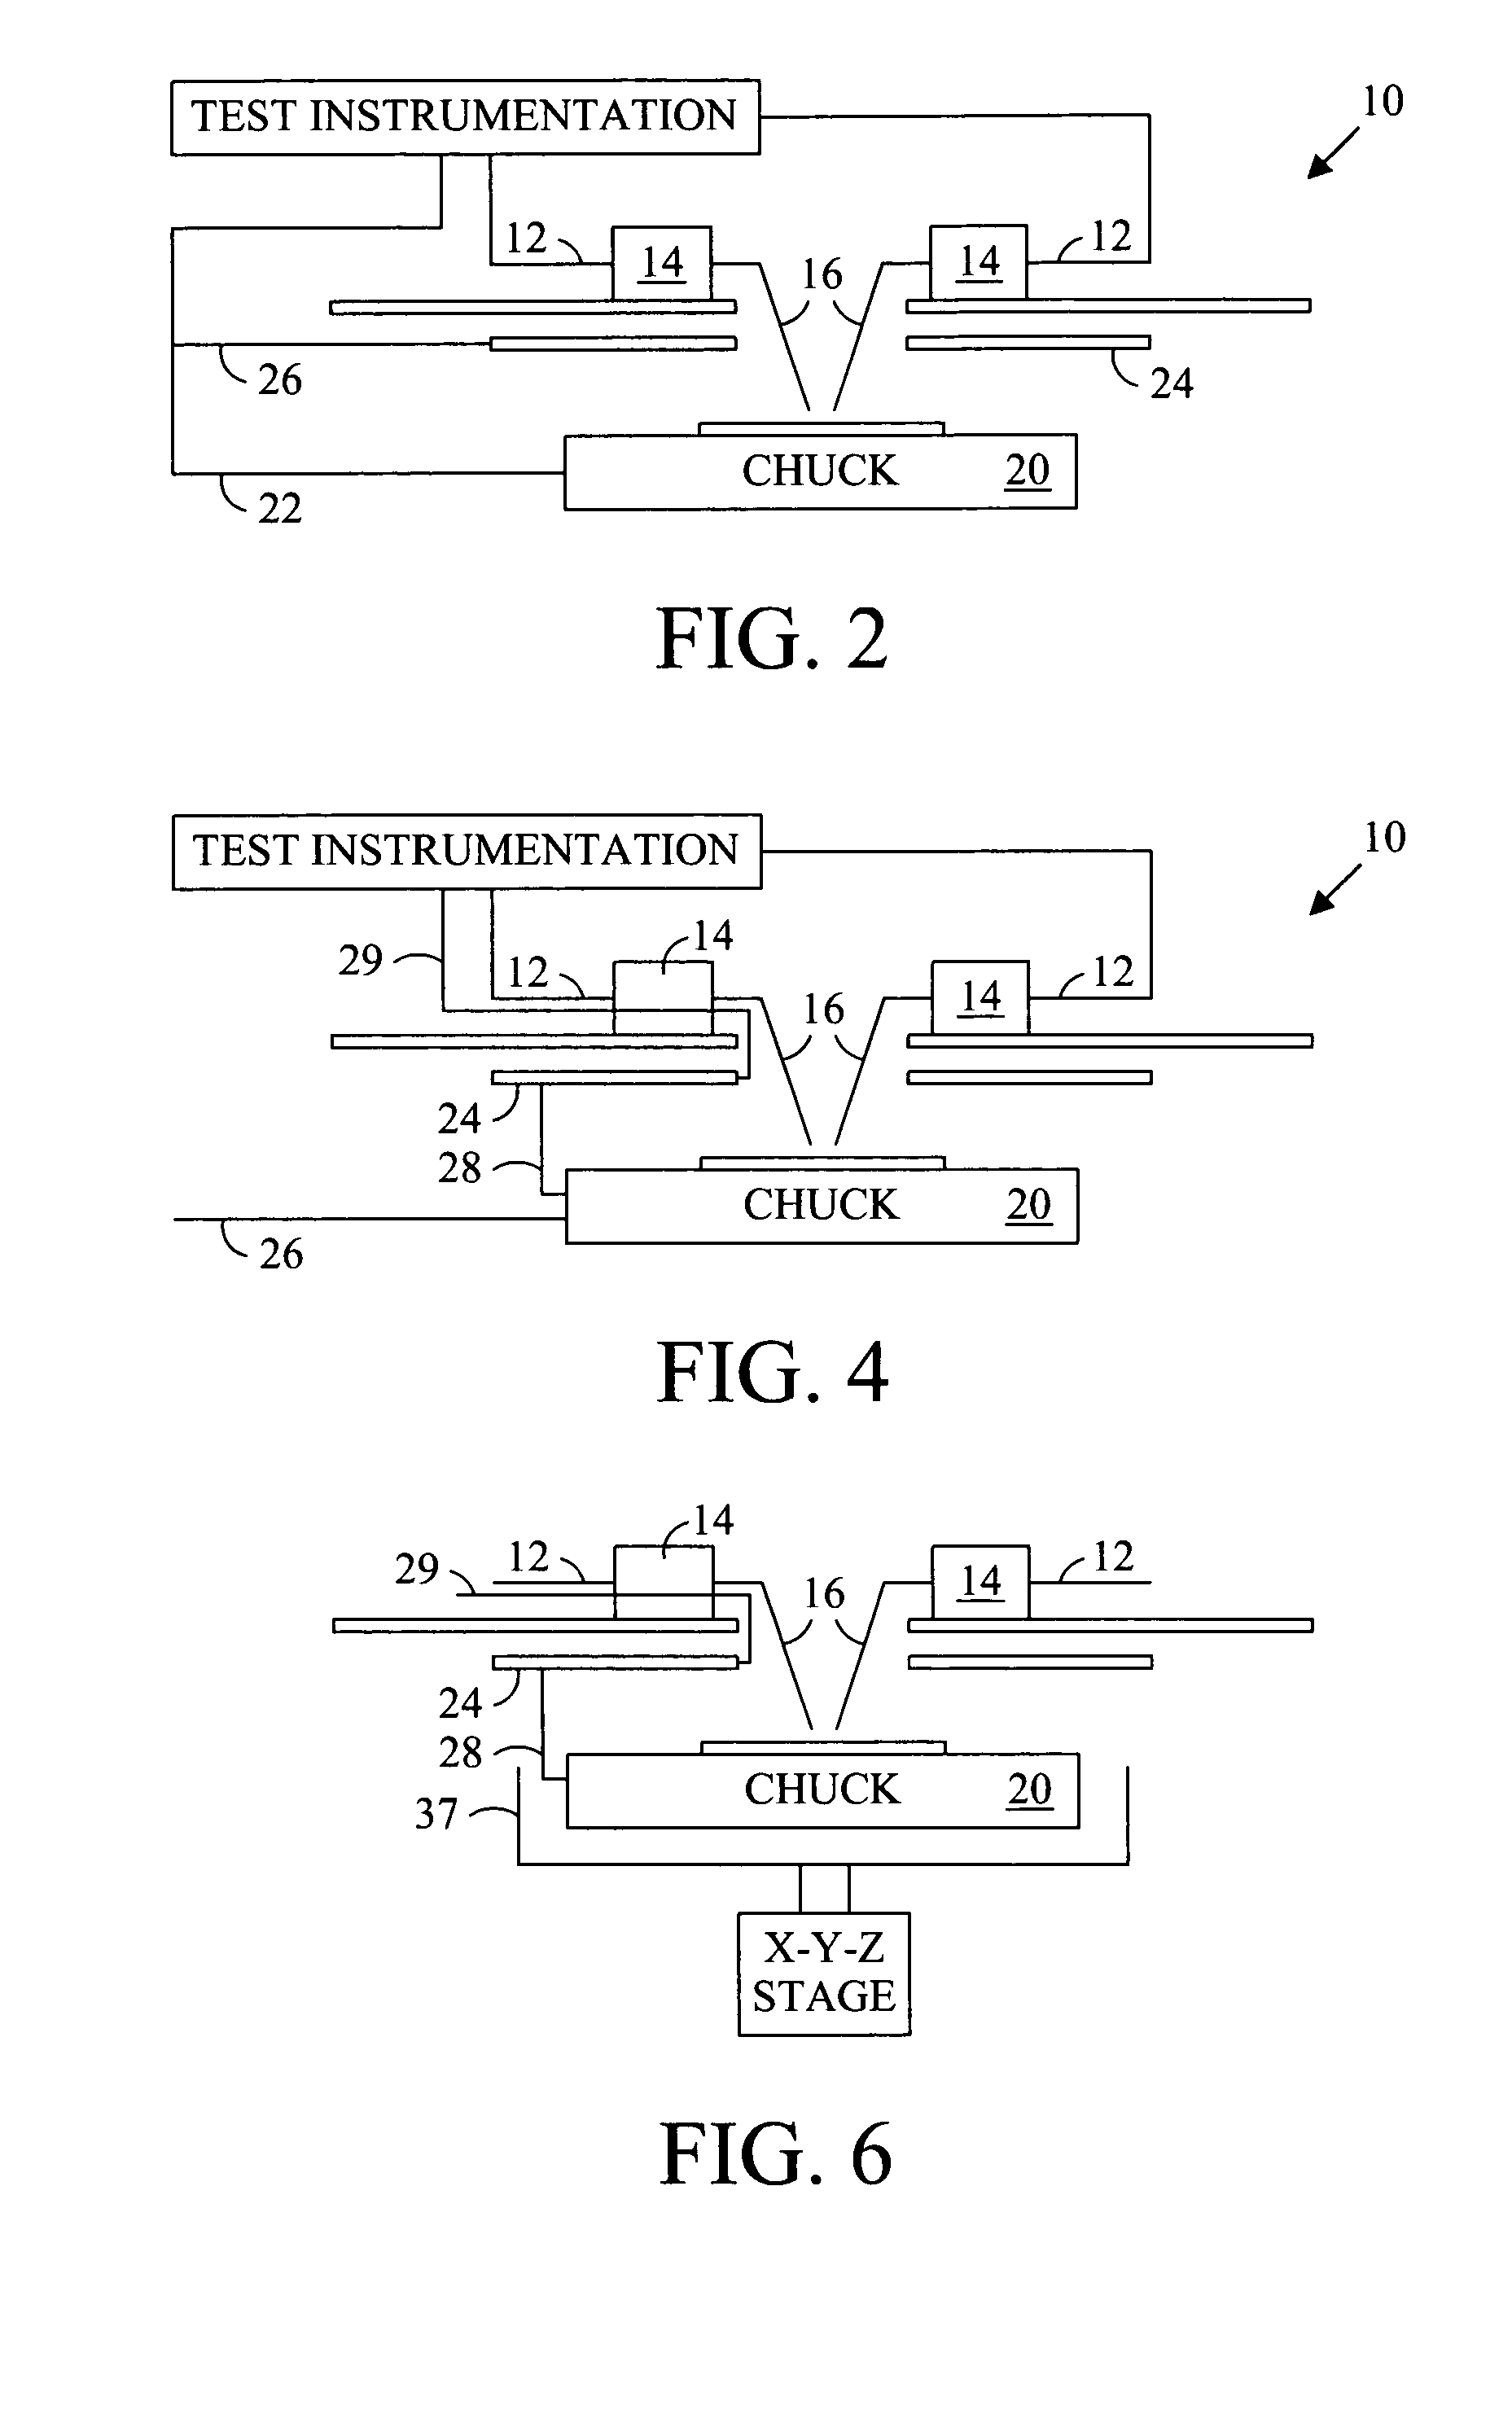 Probe station with low inductance path